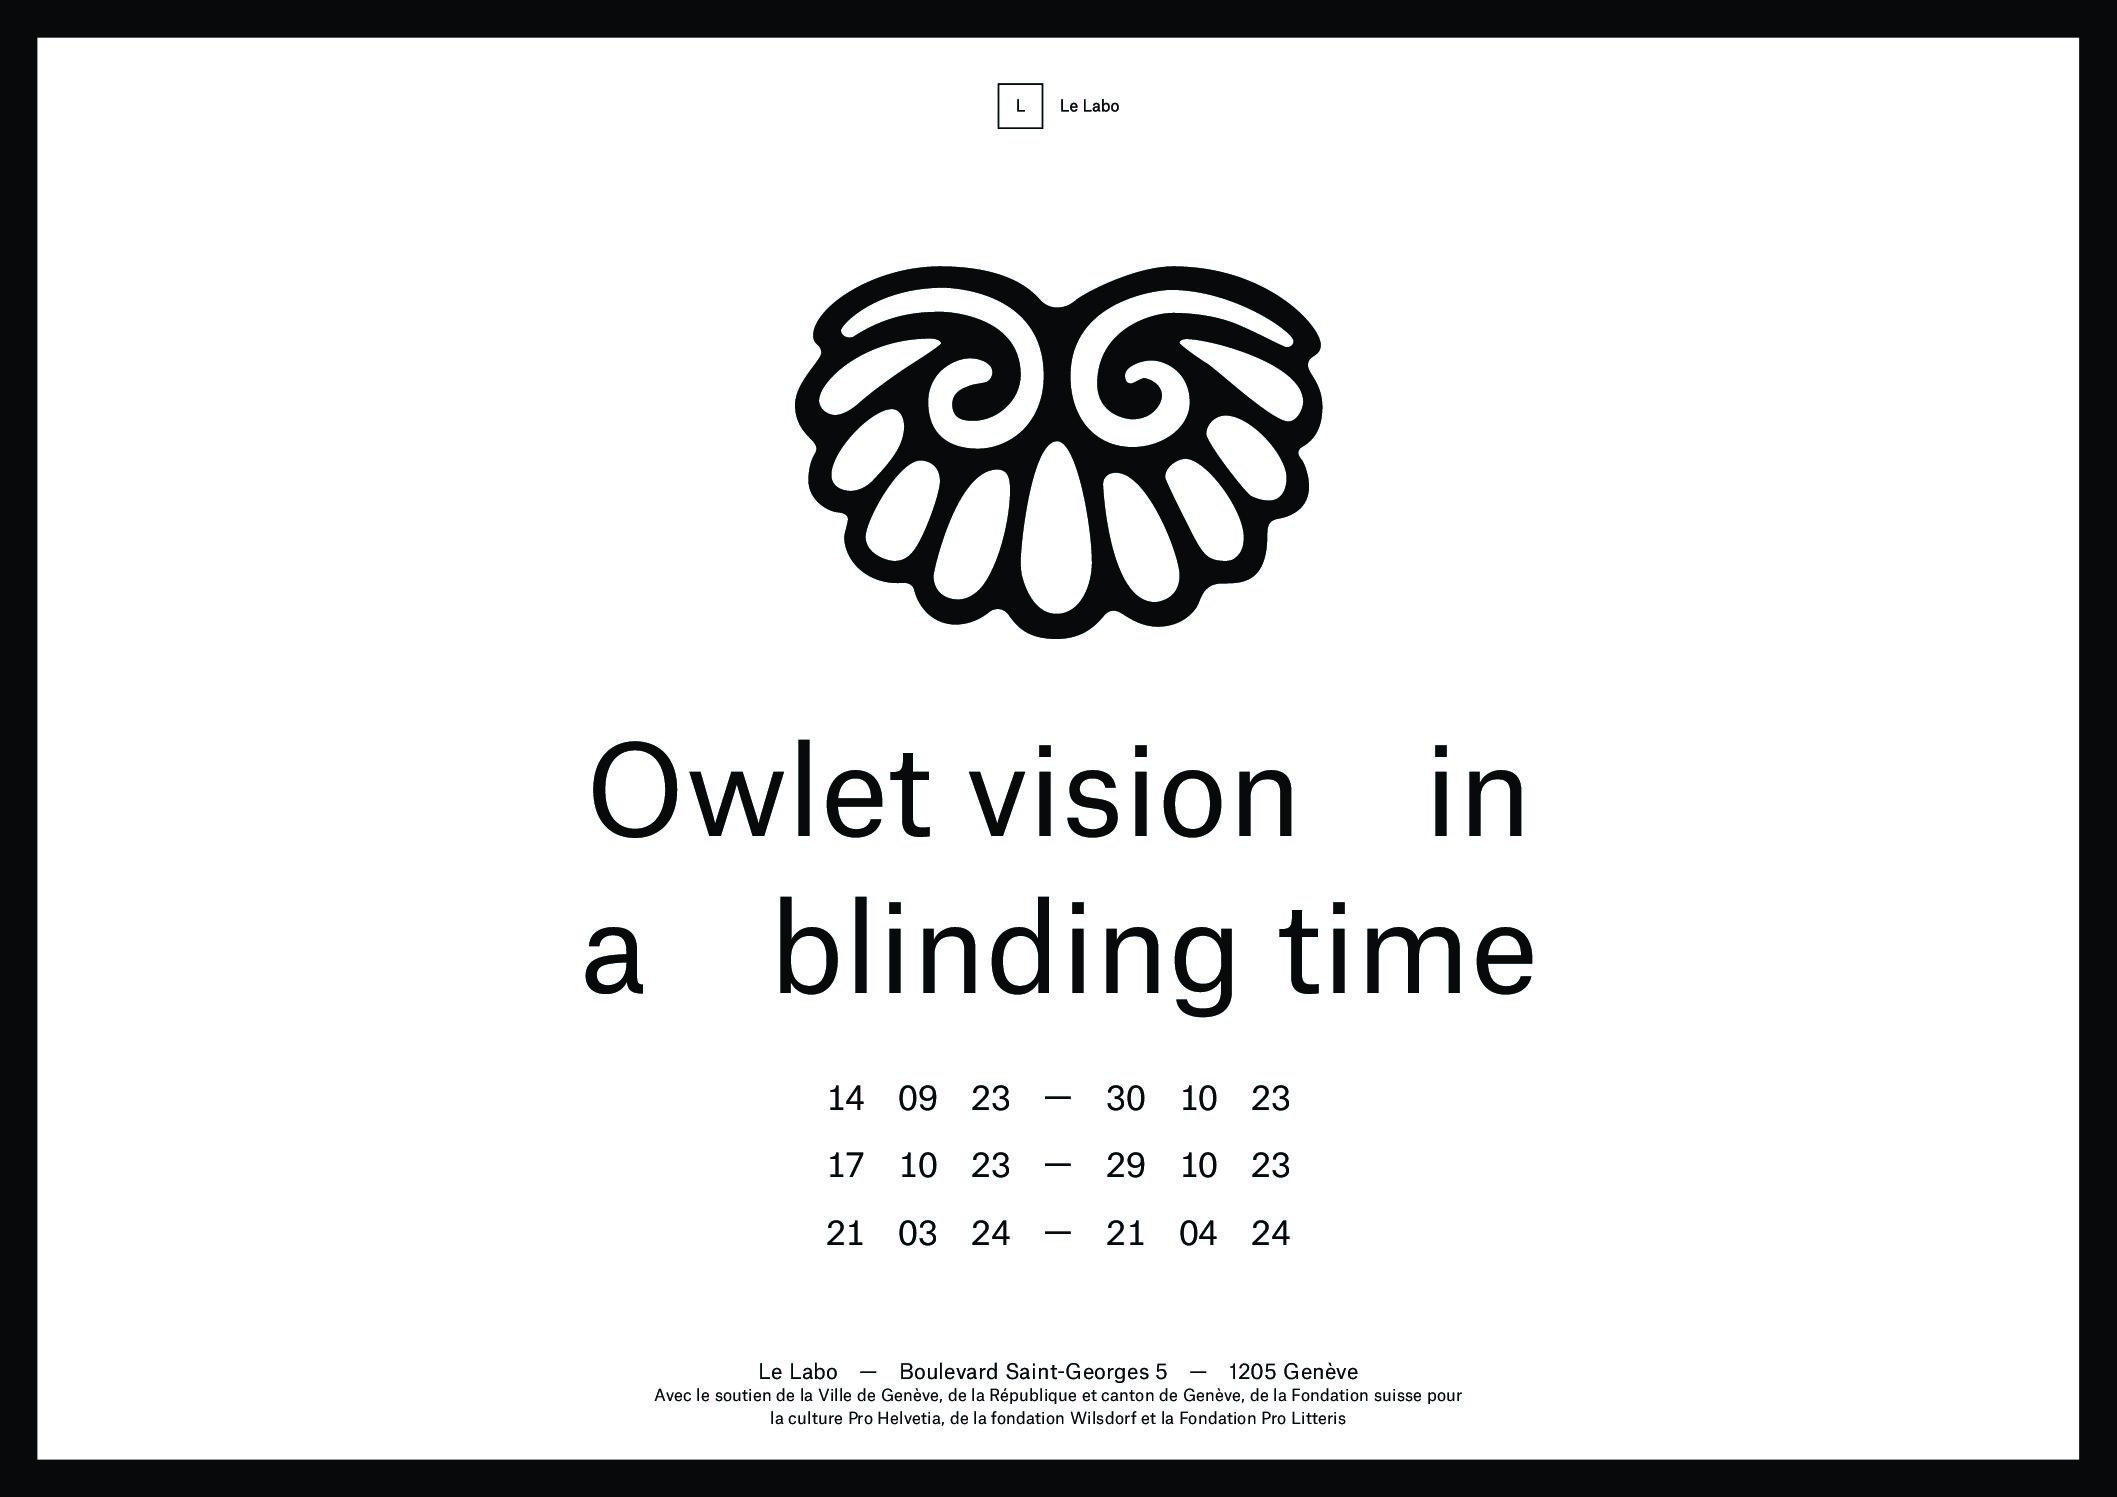 Owlet vision in blinding time – Part 1 – 14 09 23 — 30 10 23